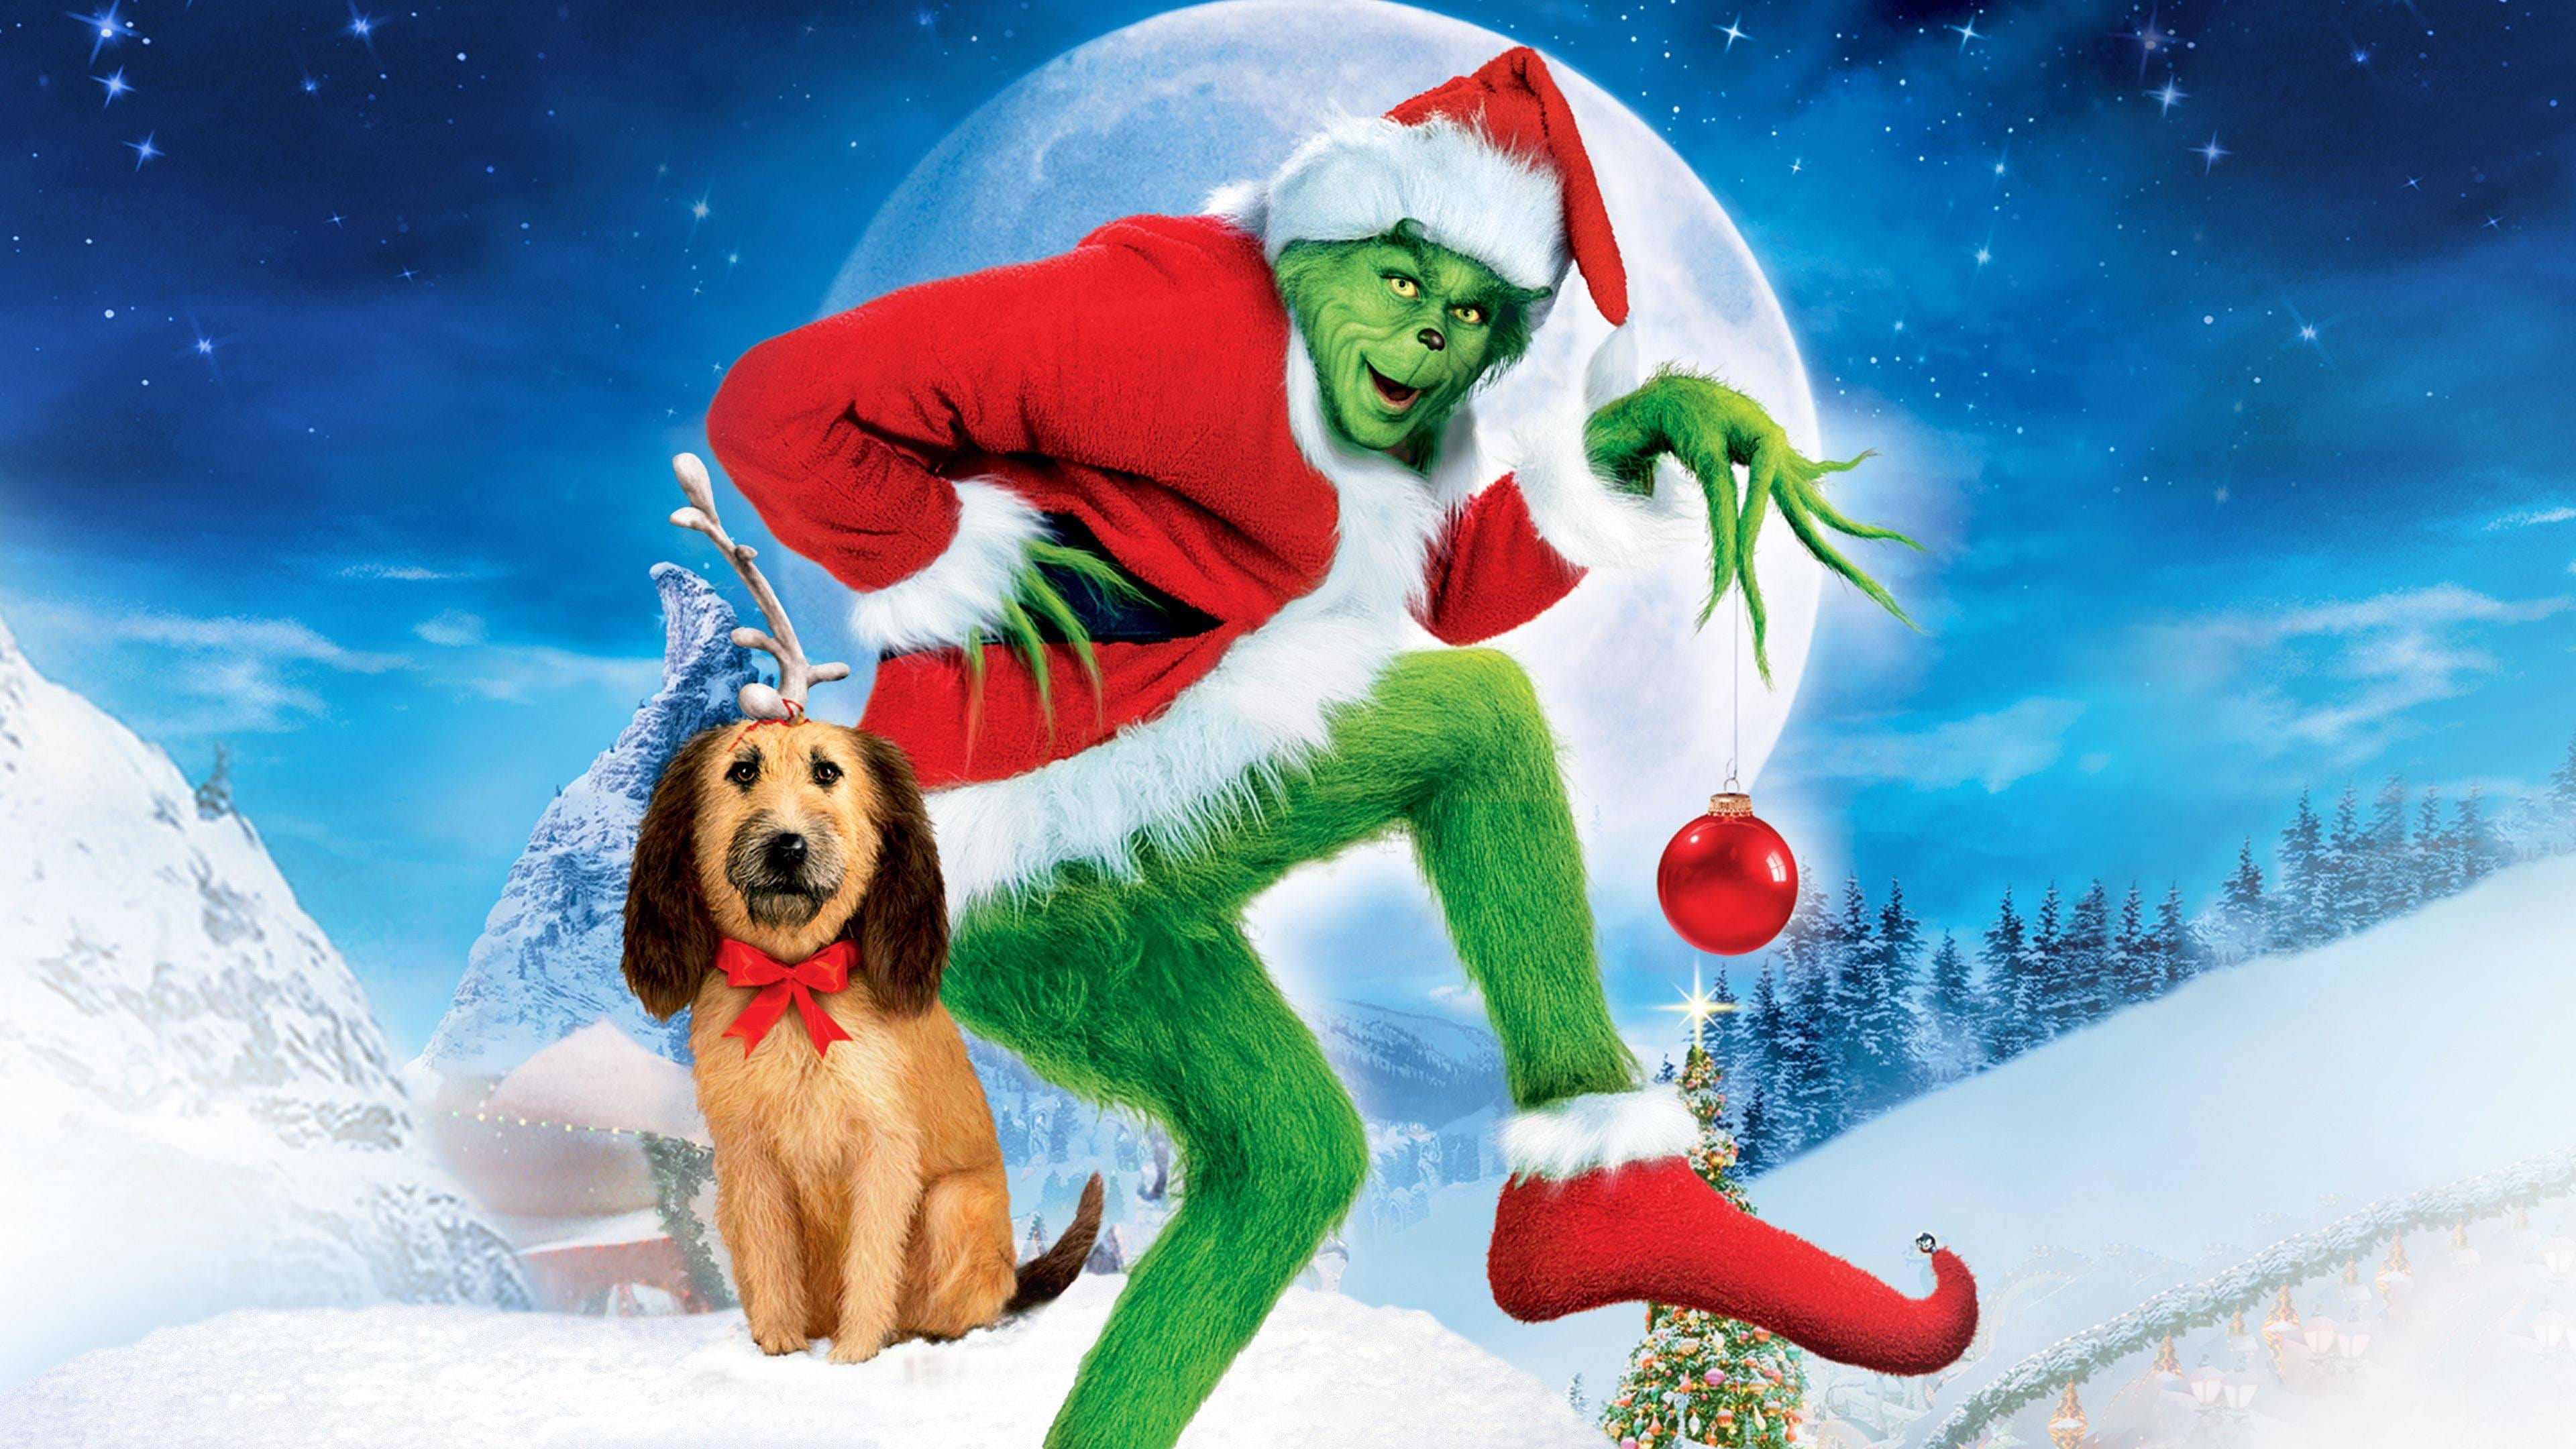 "Christmas Movie"
4. "The Grinch" - wide 3